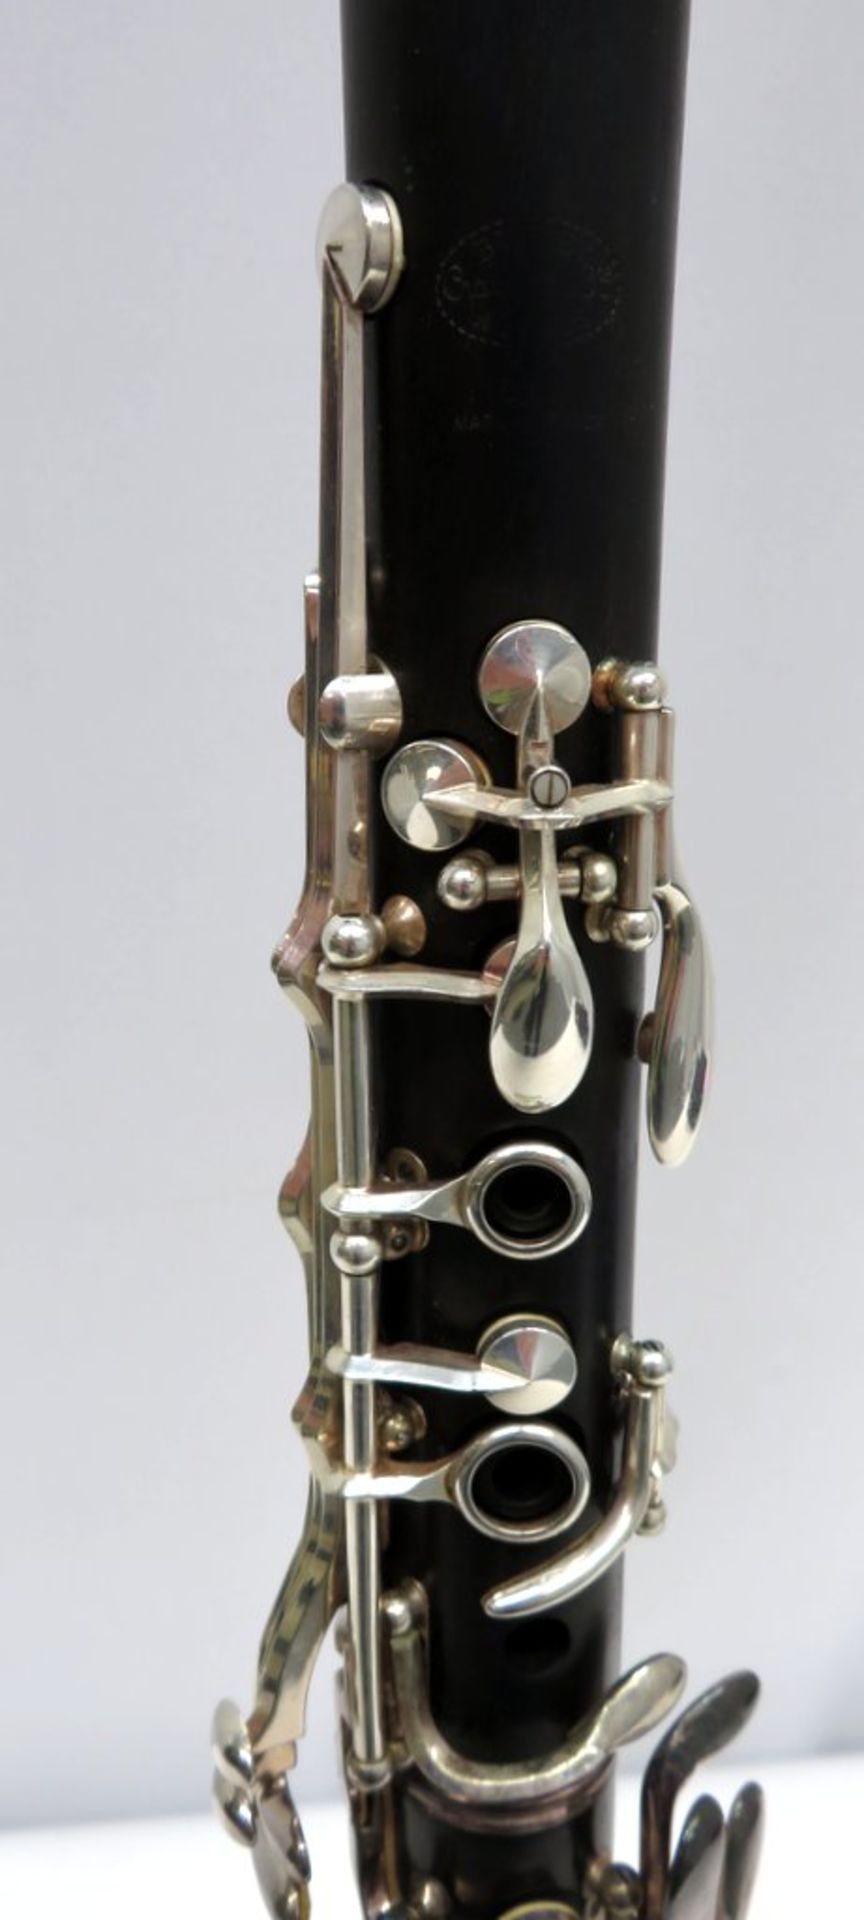 Buffet Crampon Clarinet Complete With Case. - Image 6 of 15